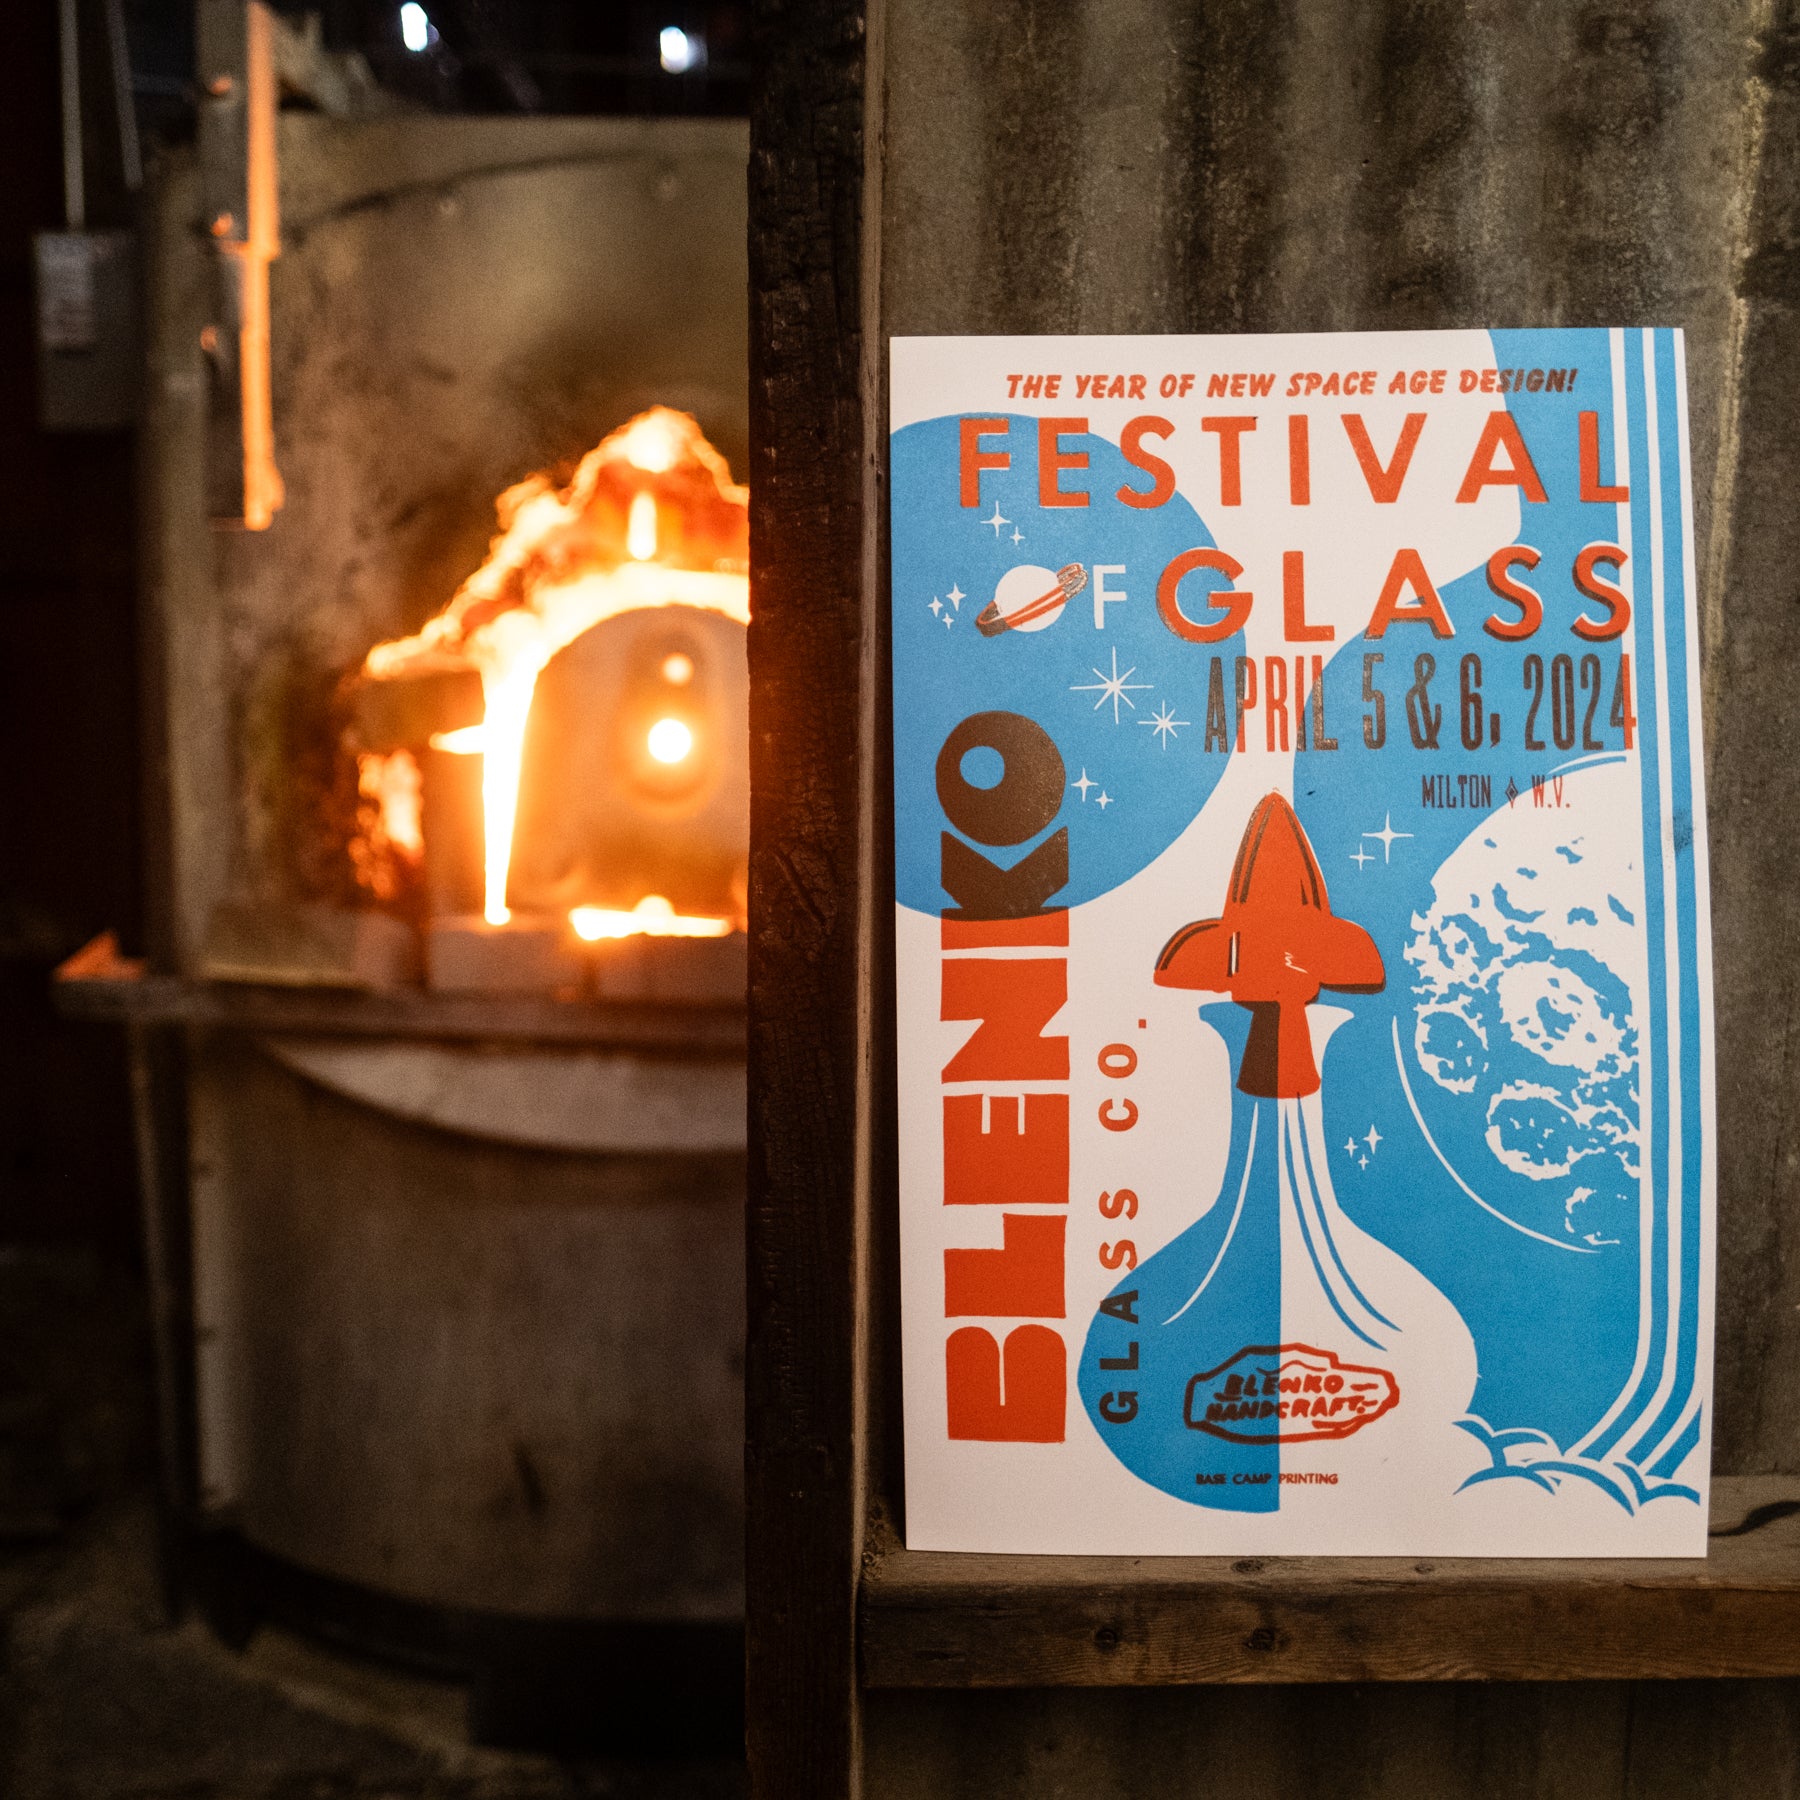 Festival of Glass Base Camp Poster